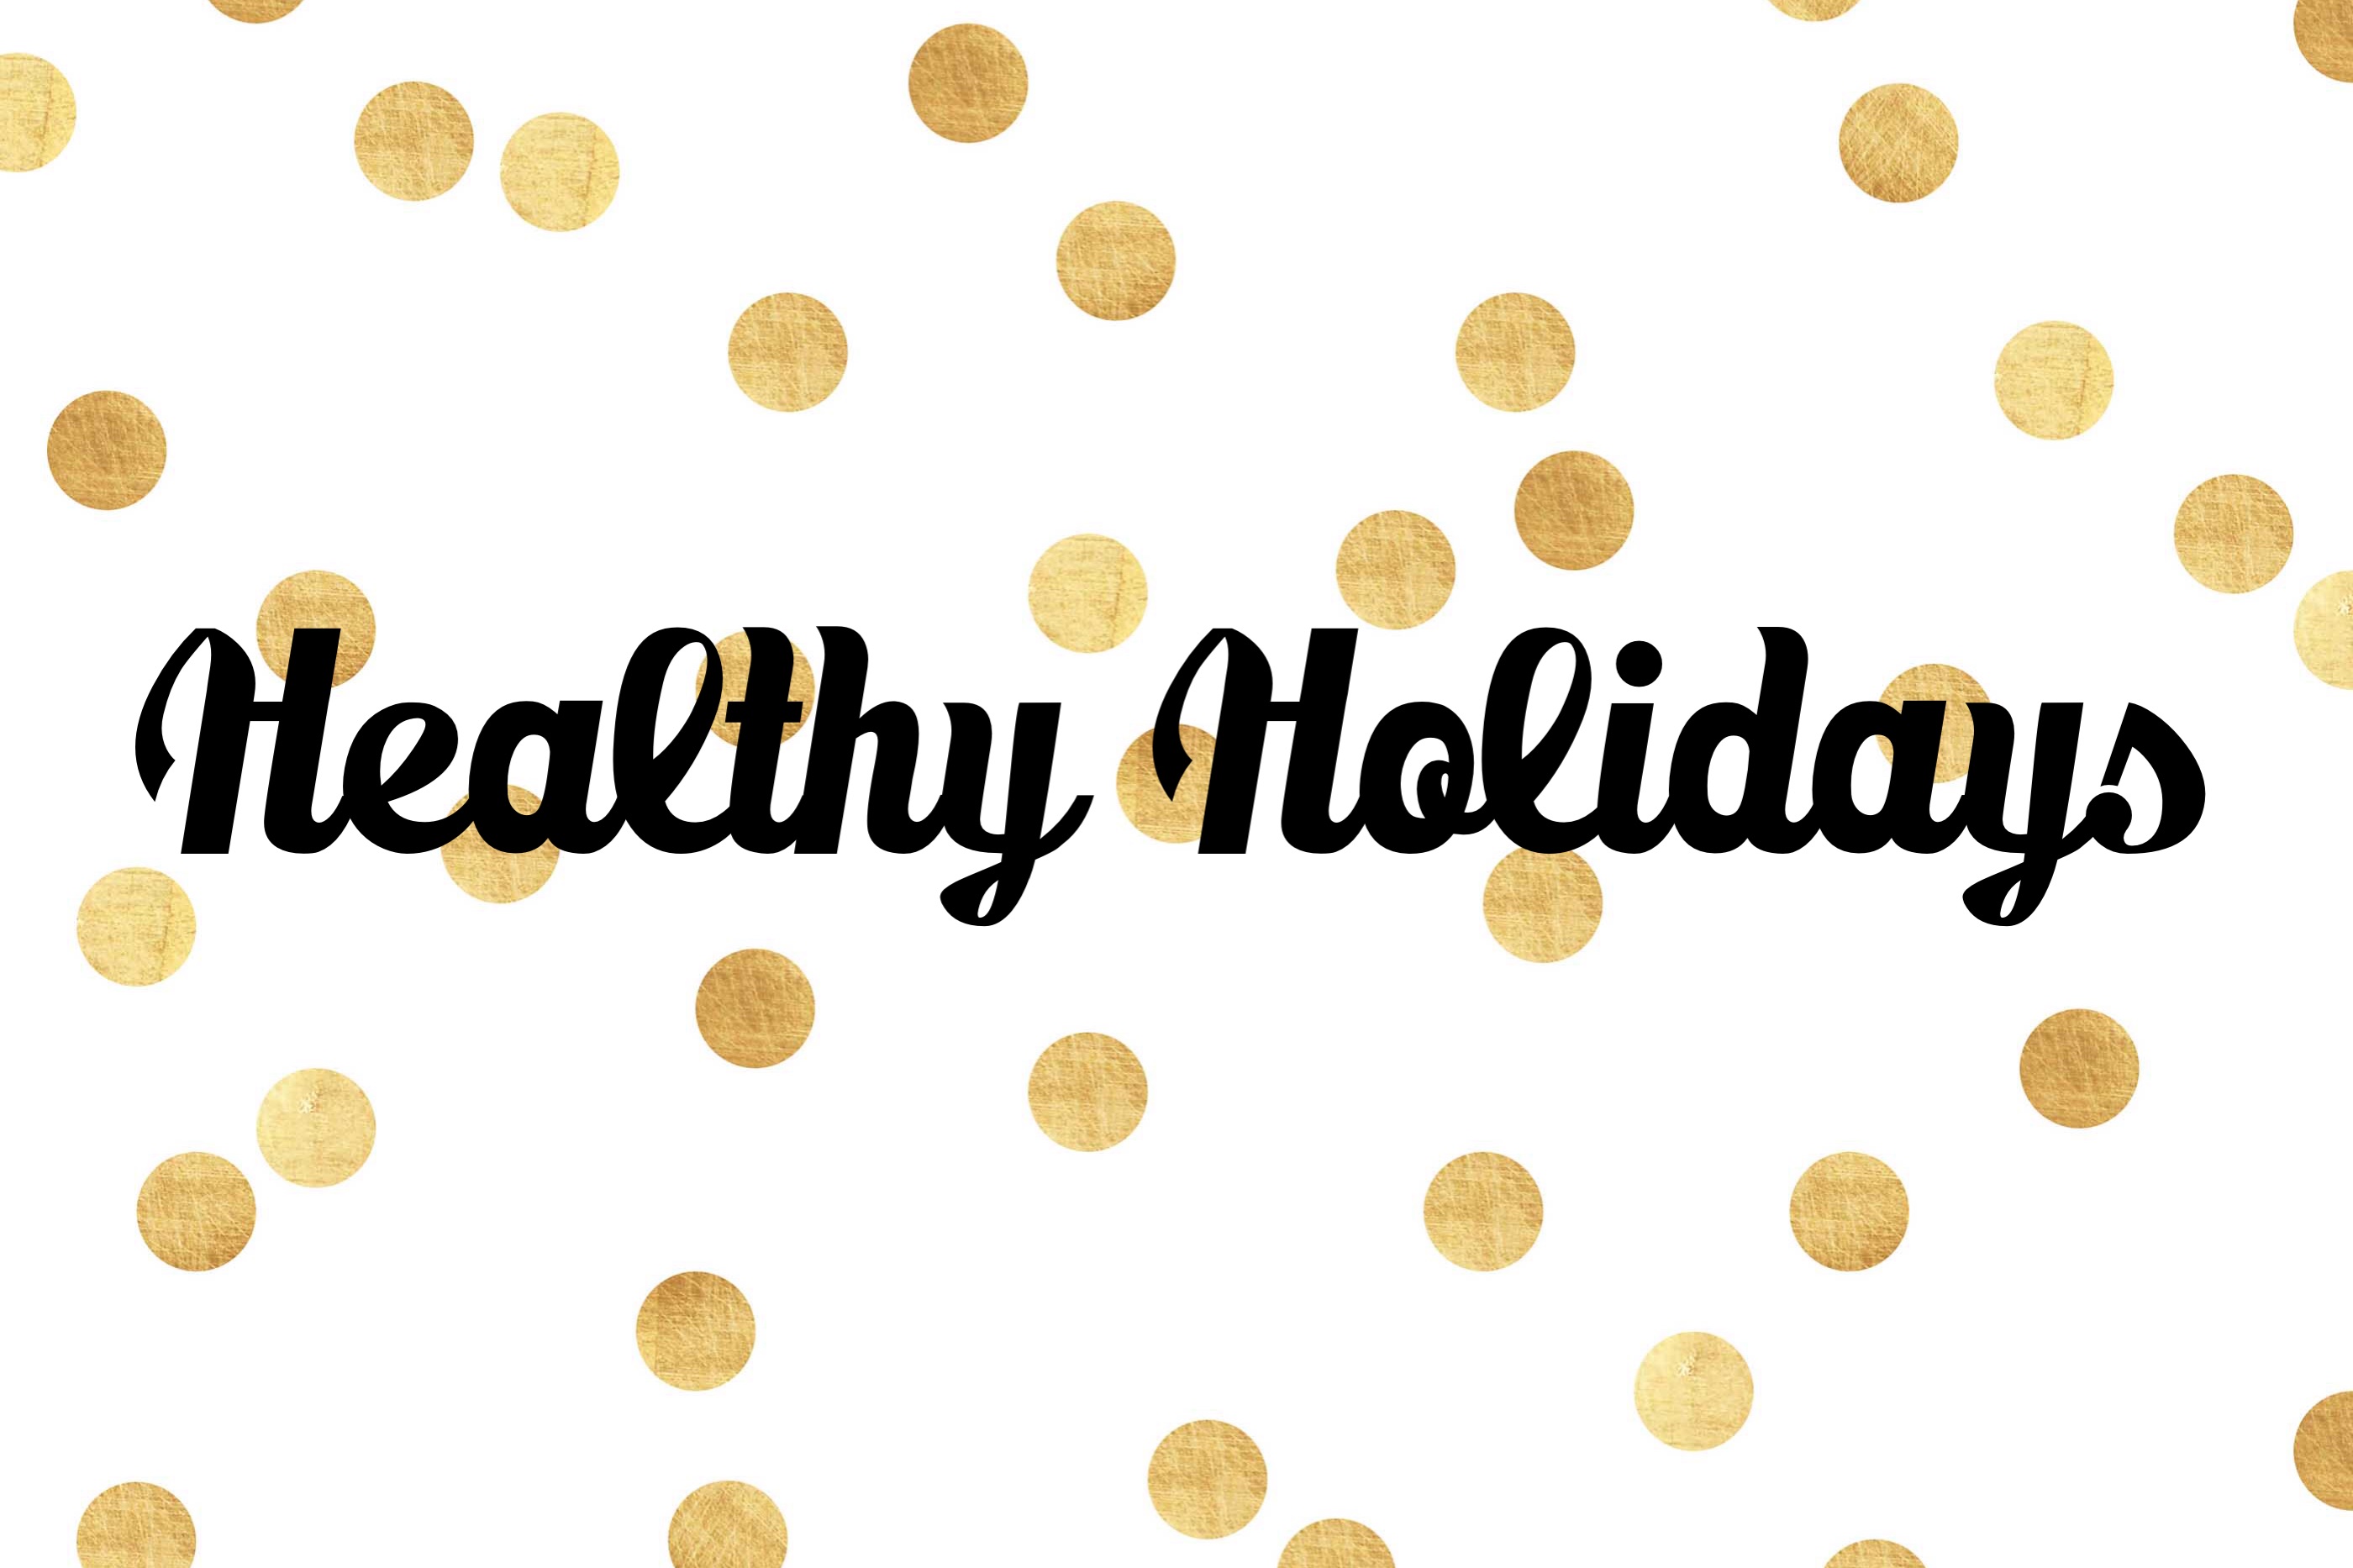 Healthy Holidays! Enjoy Your Favorite Holiday Foods And Maintain Your Weight